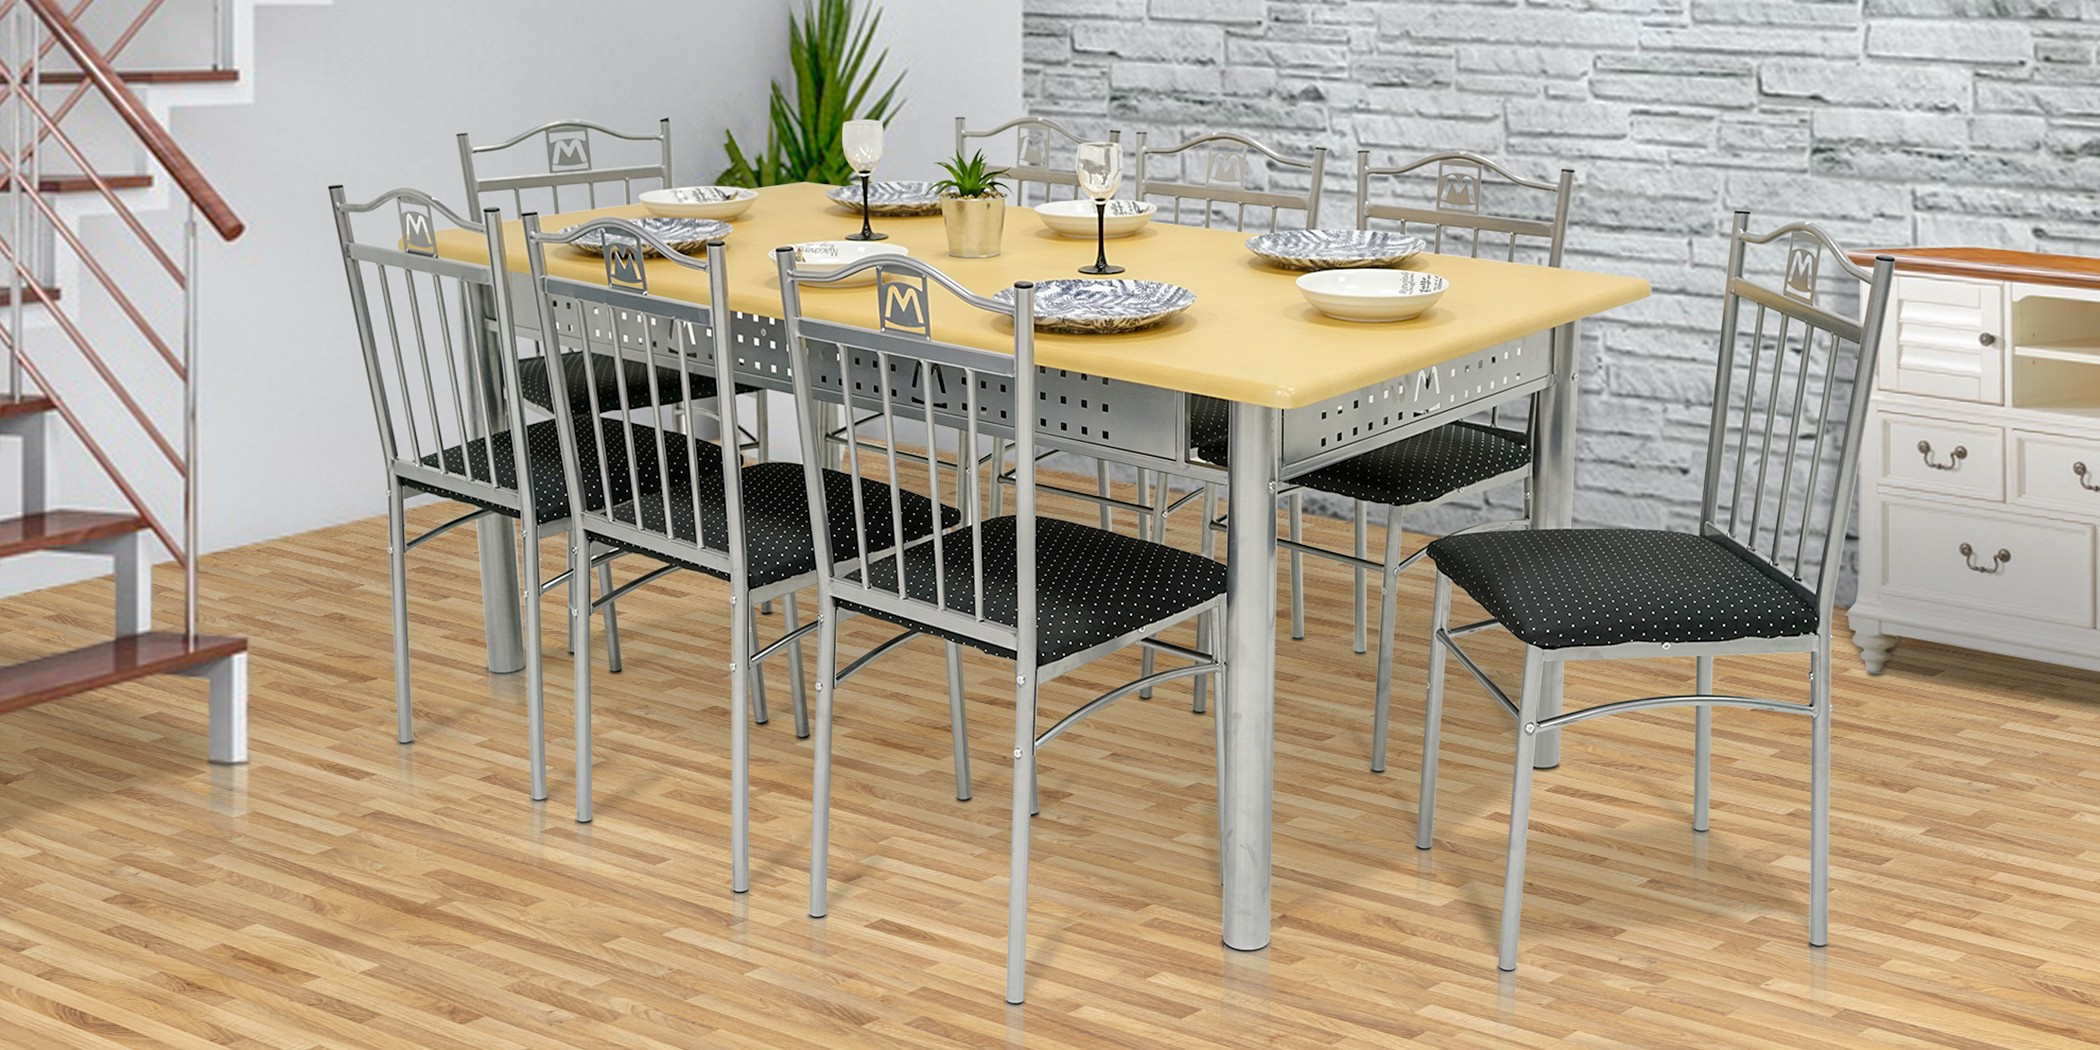 Nolana Table and 8 Chairs Metal/MDF Top